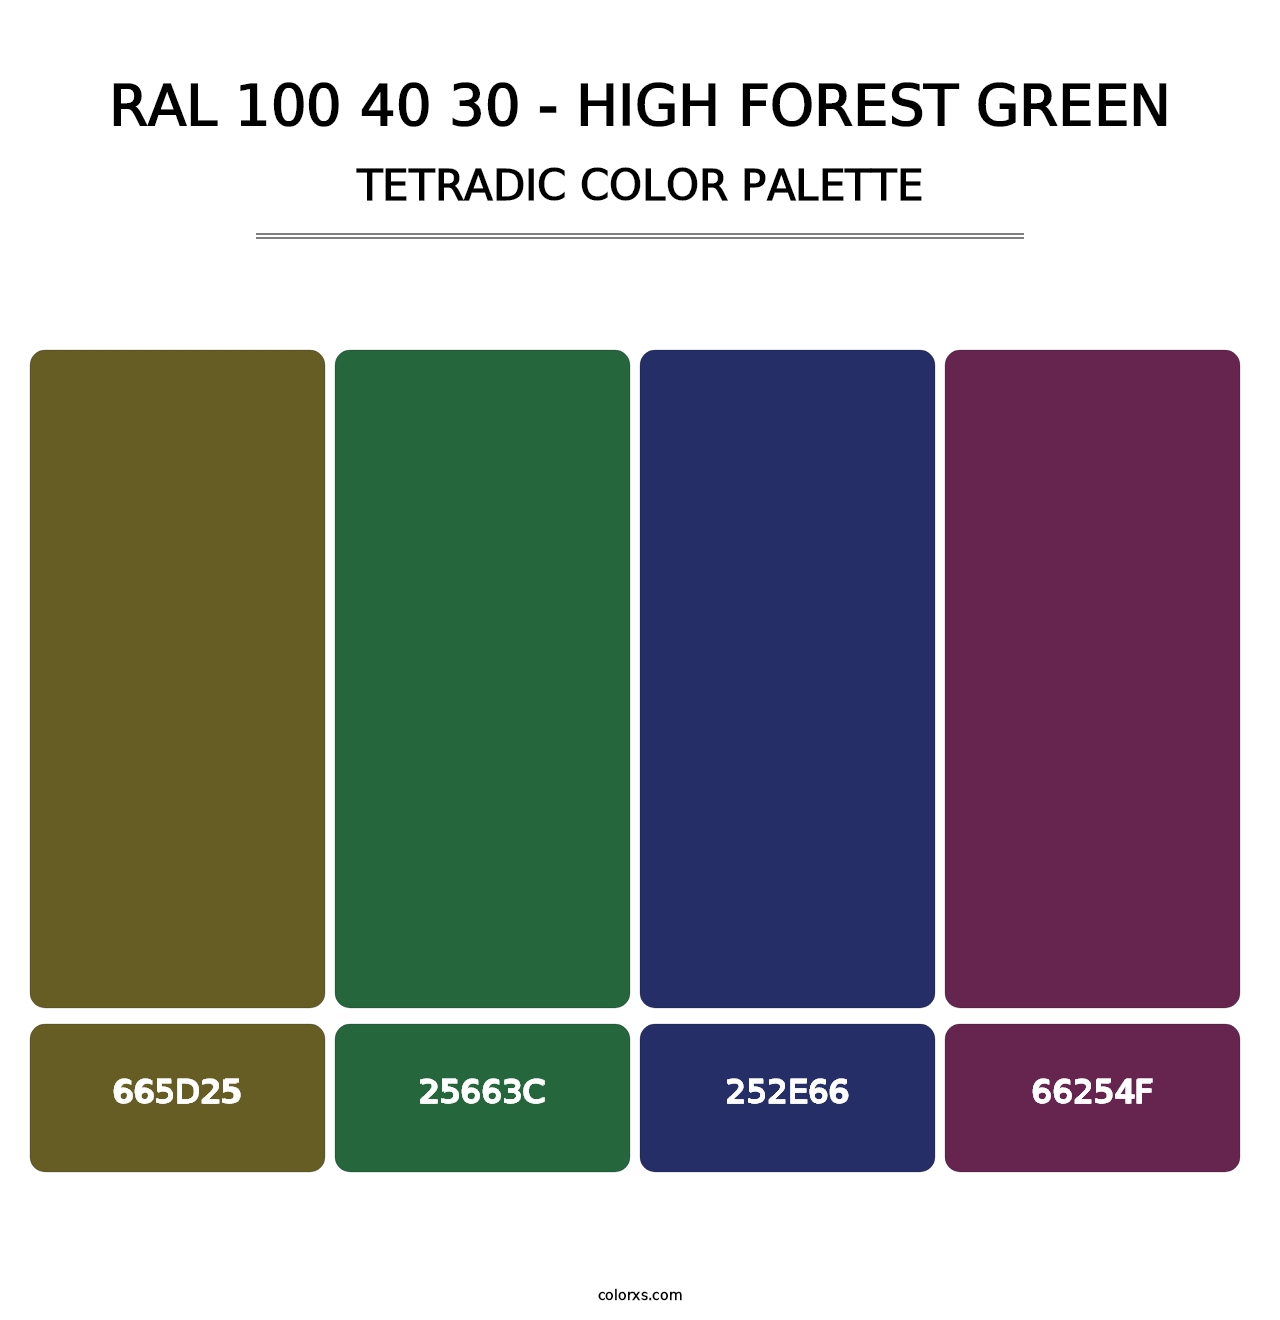 RAL 100 40 30 - High Forest Green - Tetradic Color Palette